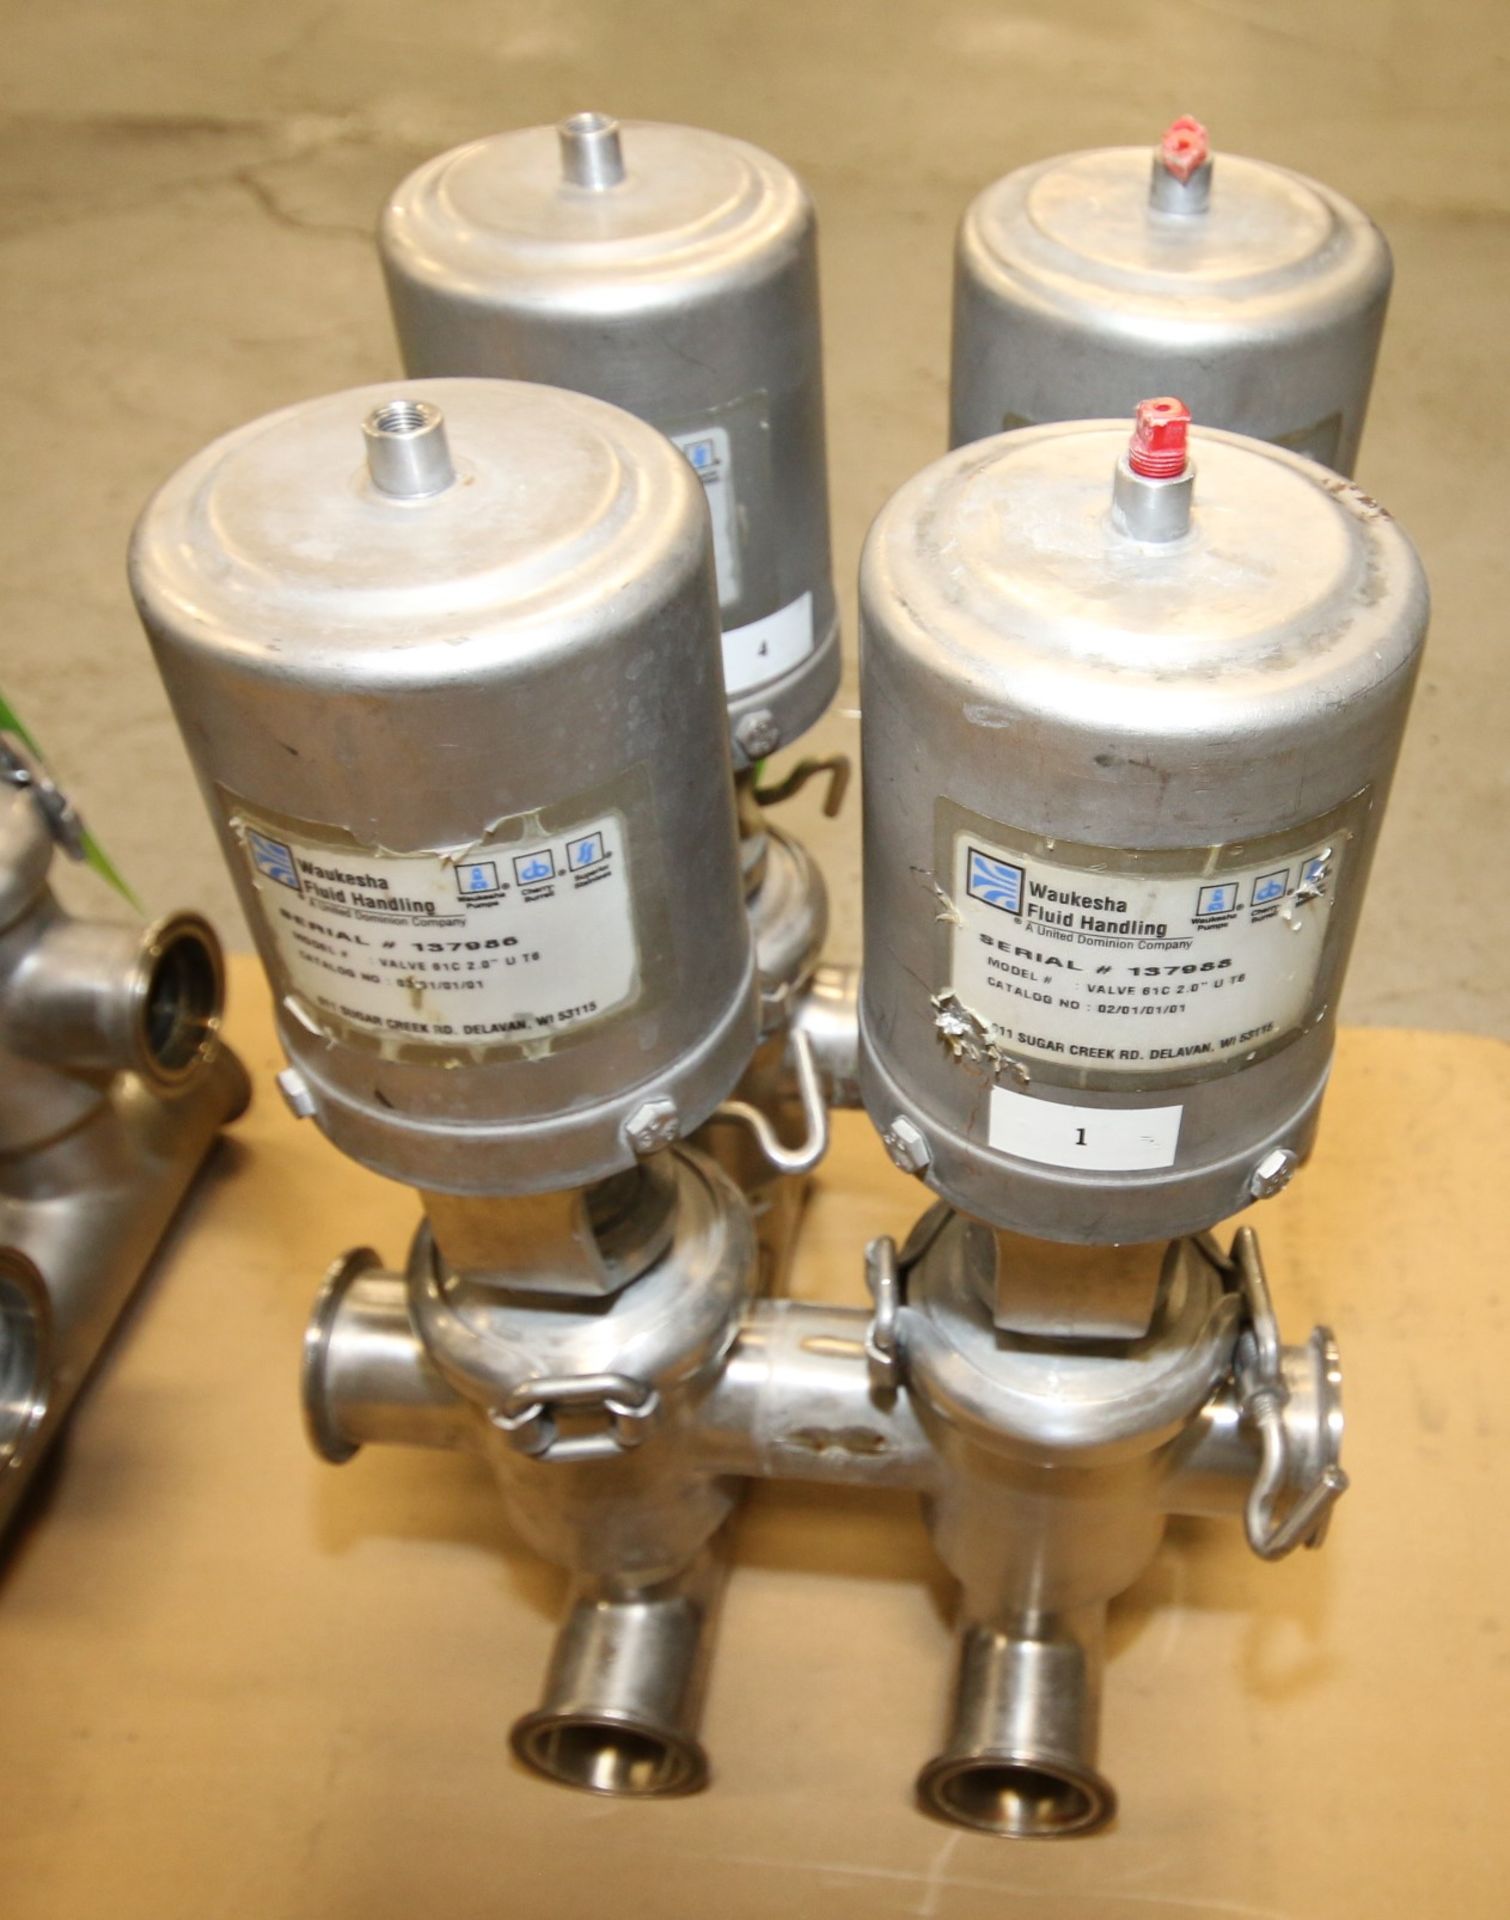 4-Valve WCB 2" S/S Air Valve Manifold / Cluster with Model 61C Valves - Image 3 of 3